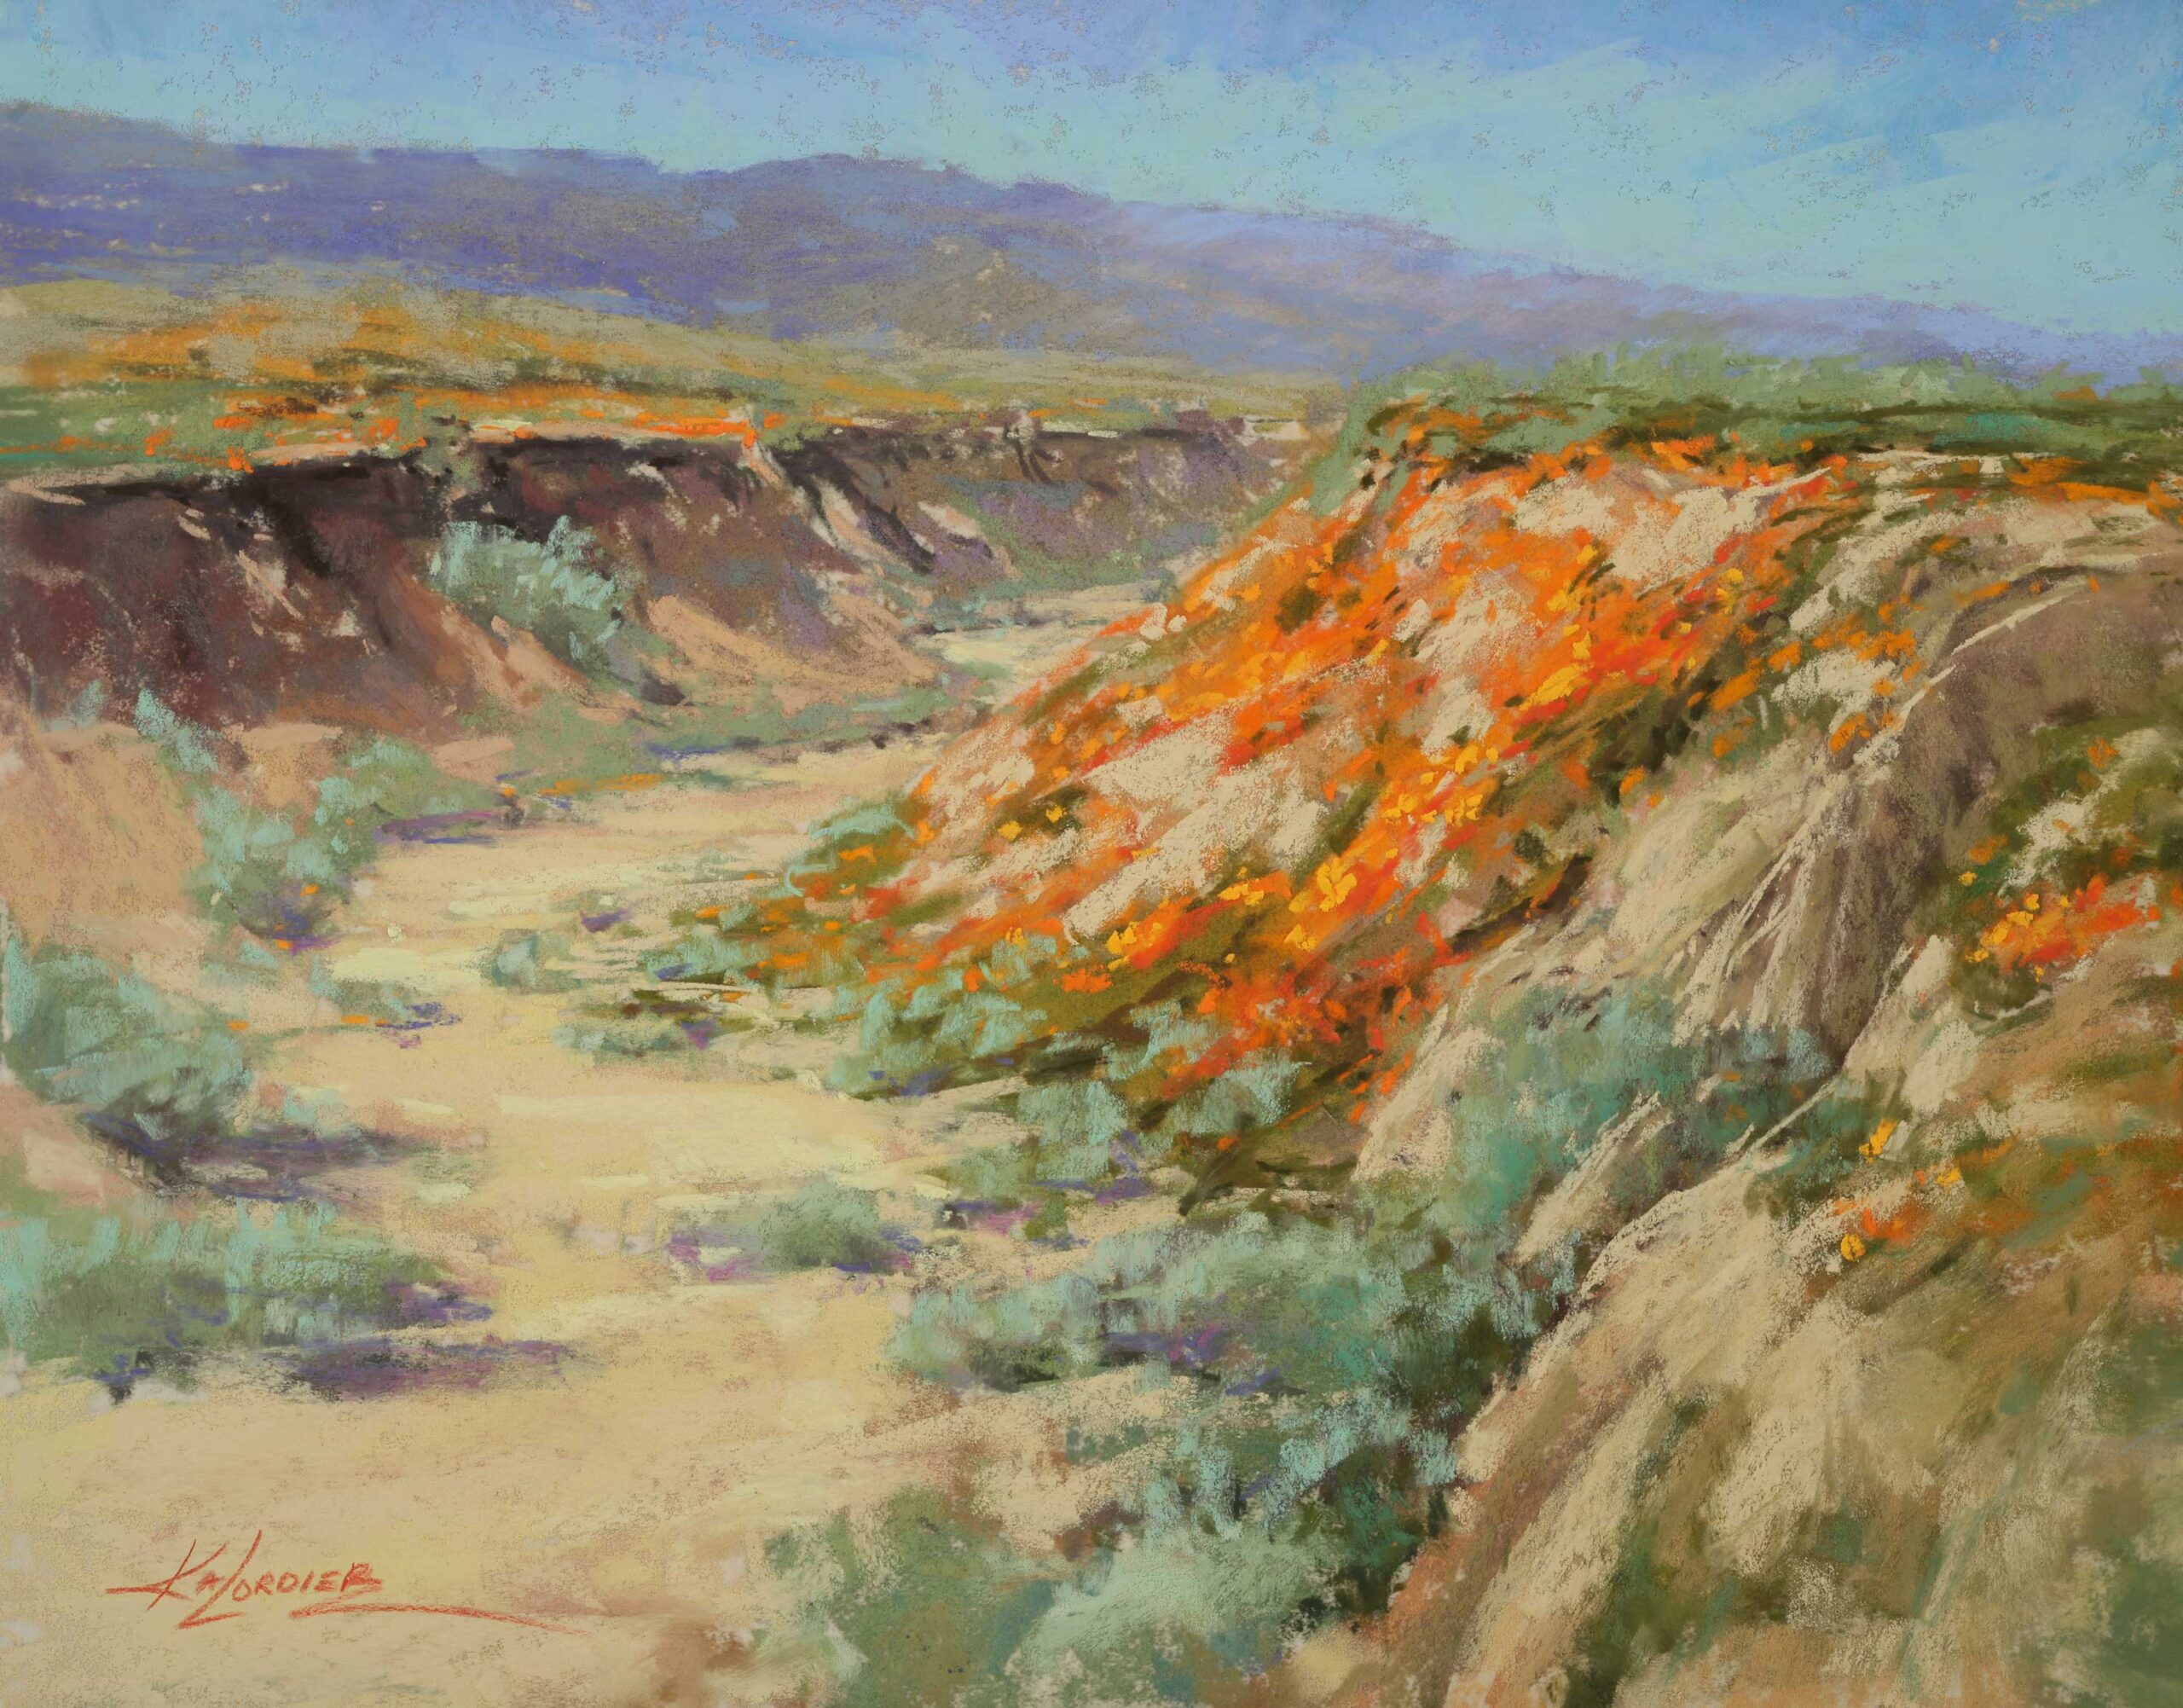 Kim Lordier, "Copa de Oro in Antelope Valley," 2019, pastel painting 11 x 14 in., collection the artist, plein air 